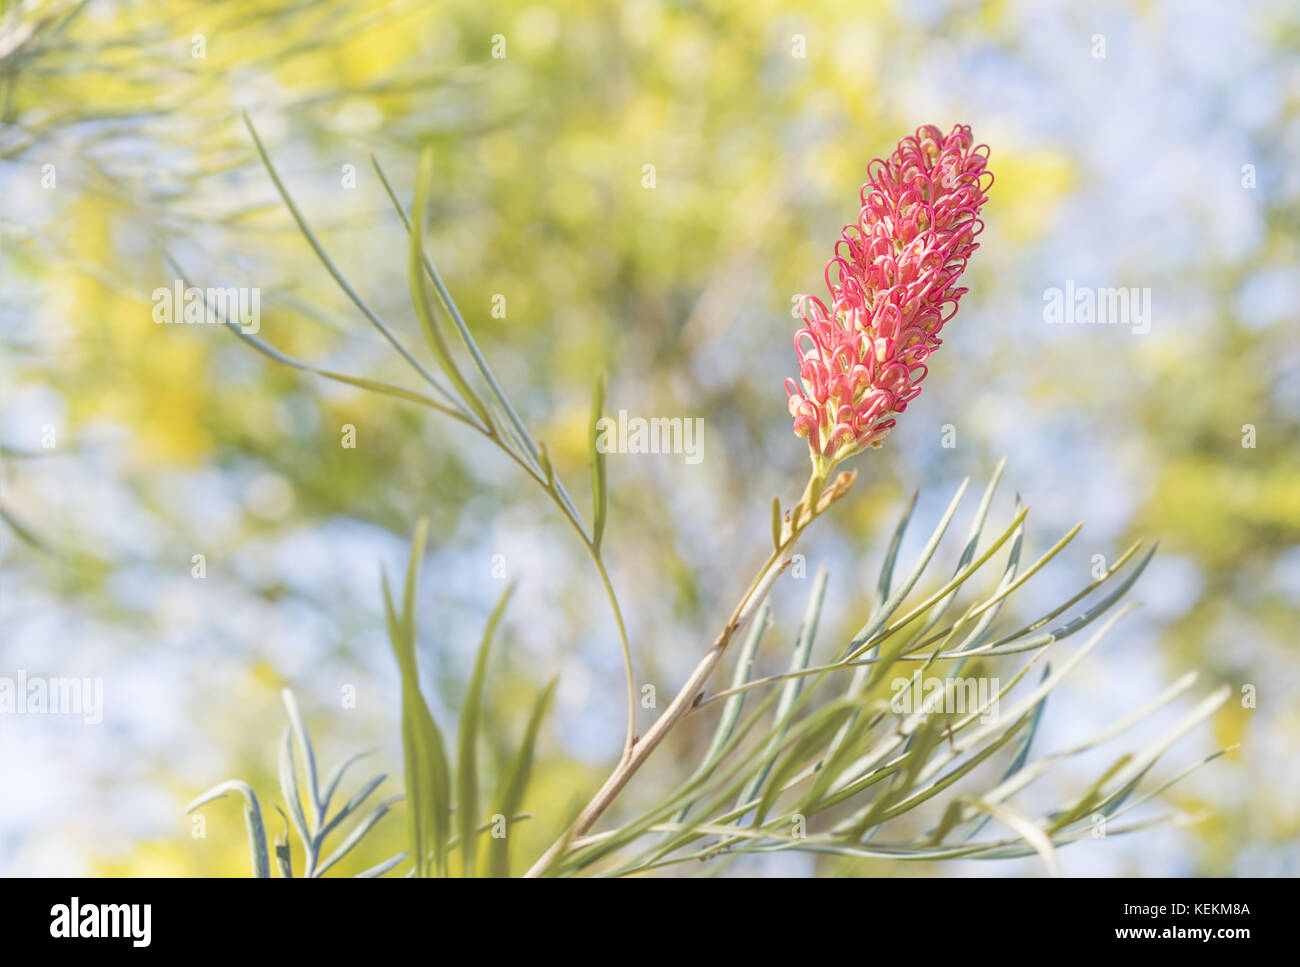 Australian spring flowers with new pink flower bloom on  Spider Flower Grevillea with yellow wattle trees in background Stock Photo